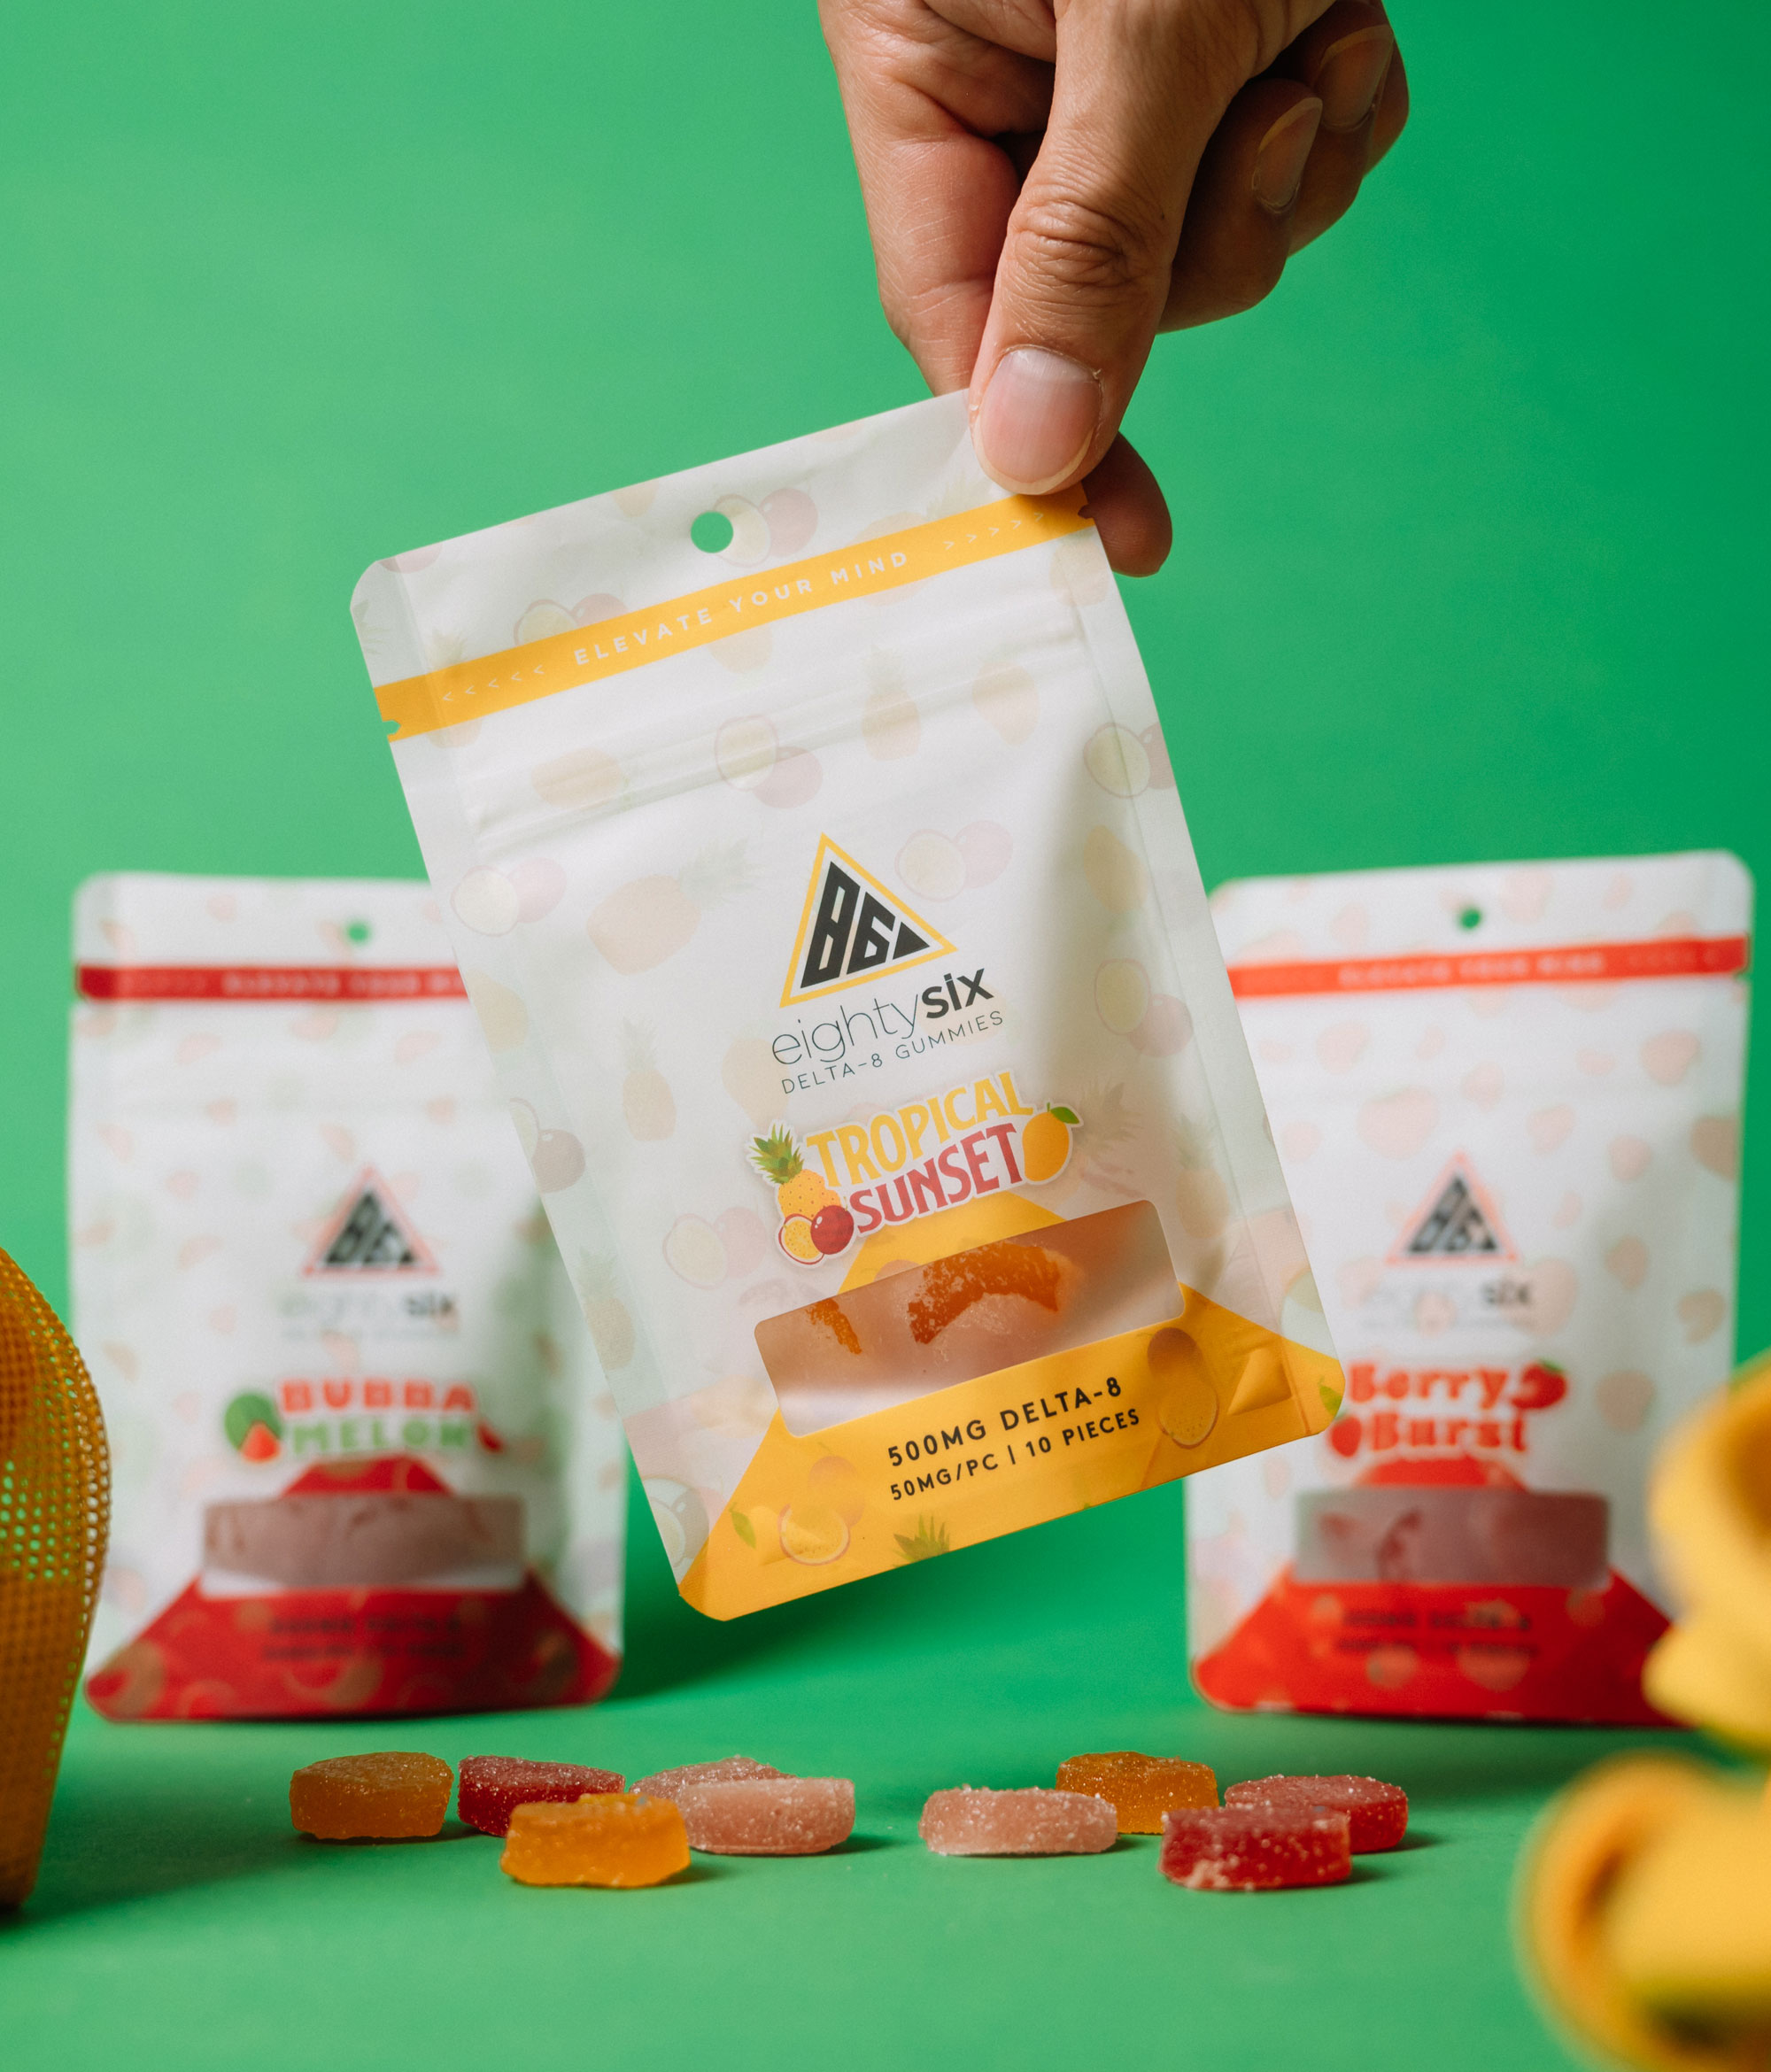 Delta-8 Edibles Series featuring the all-new Delta-8 THC Gummies